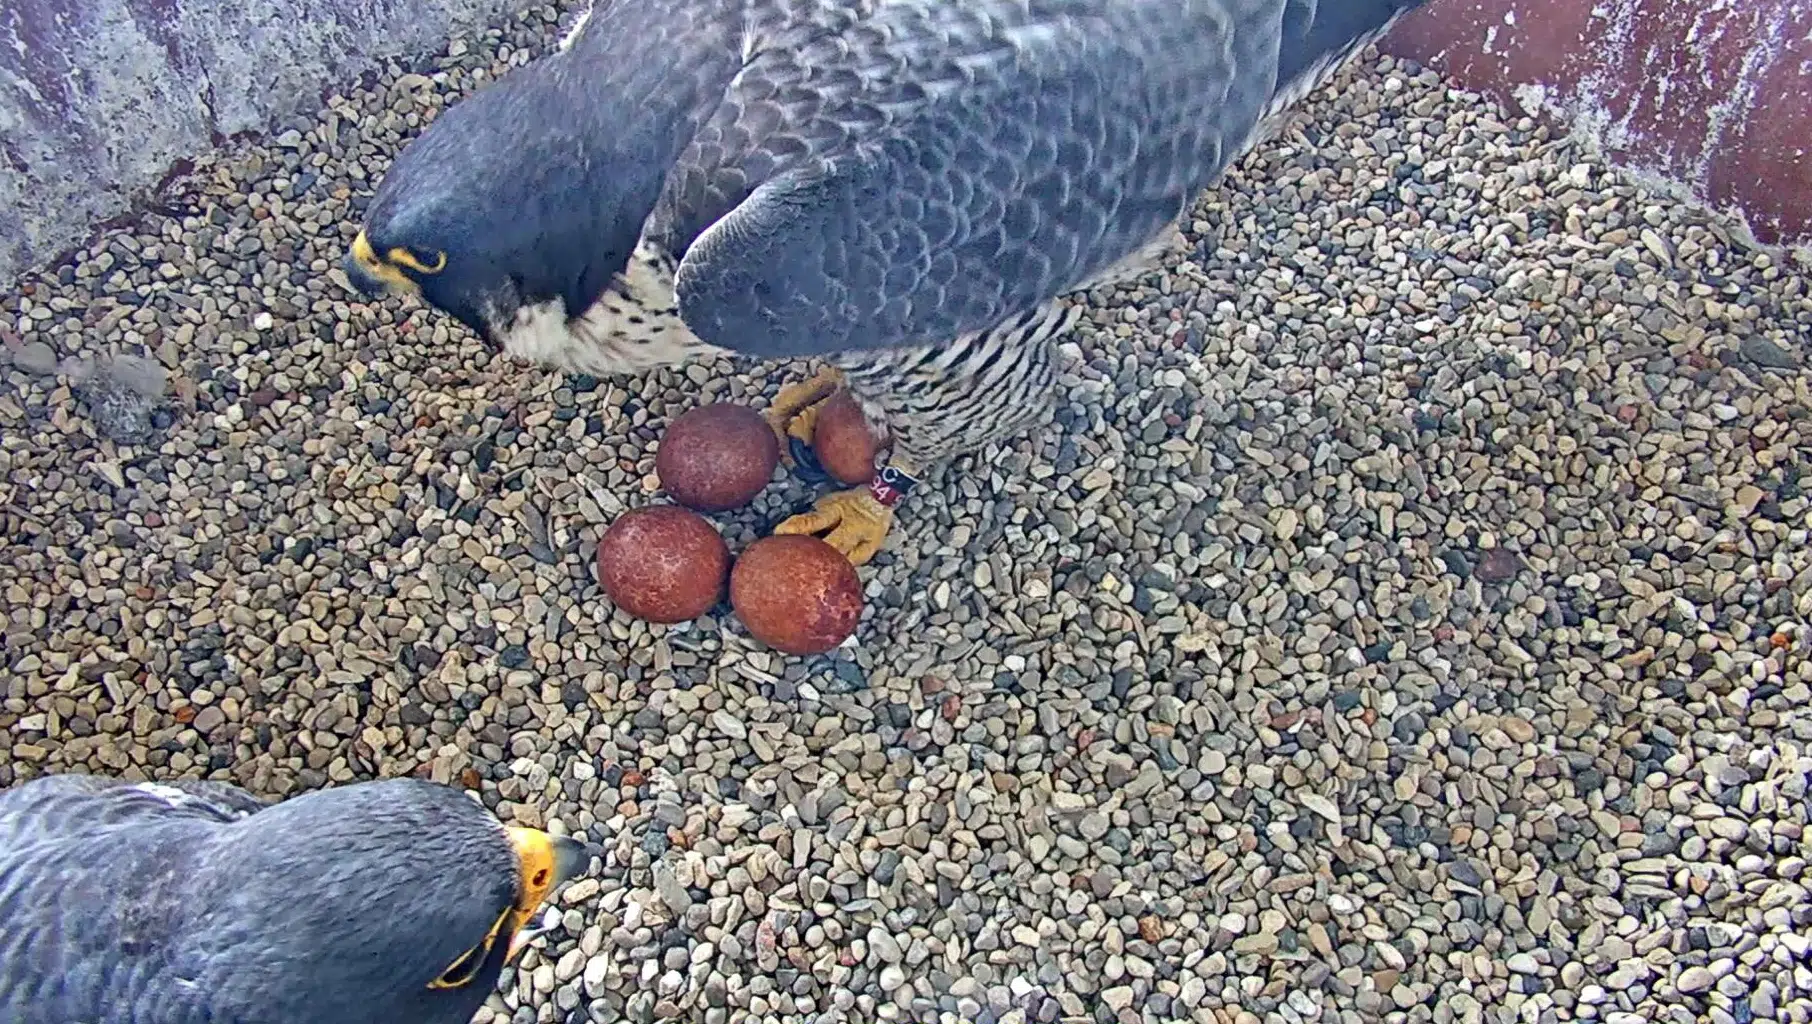 WPS Has Welcomed Their 100th Peregrine Falcon Chick